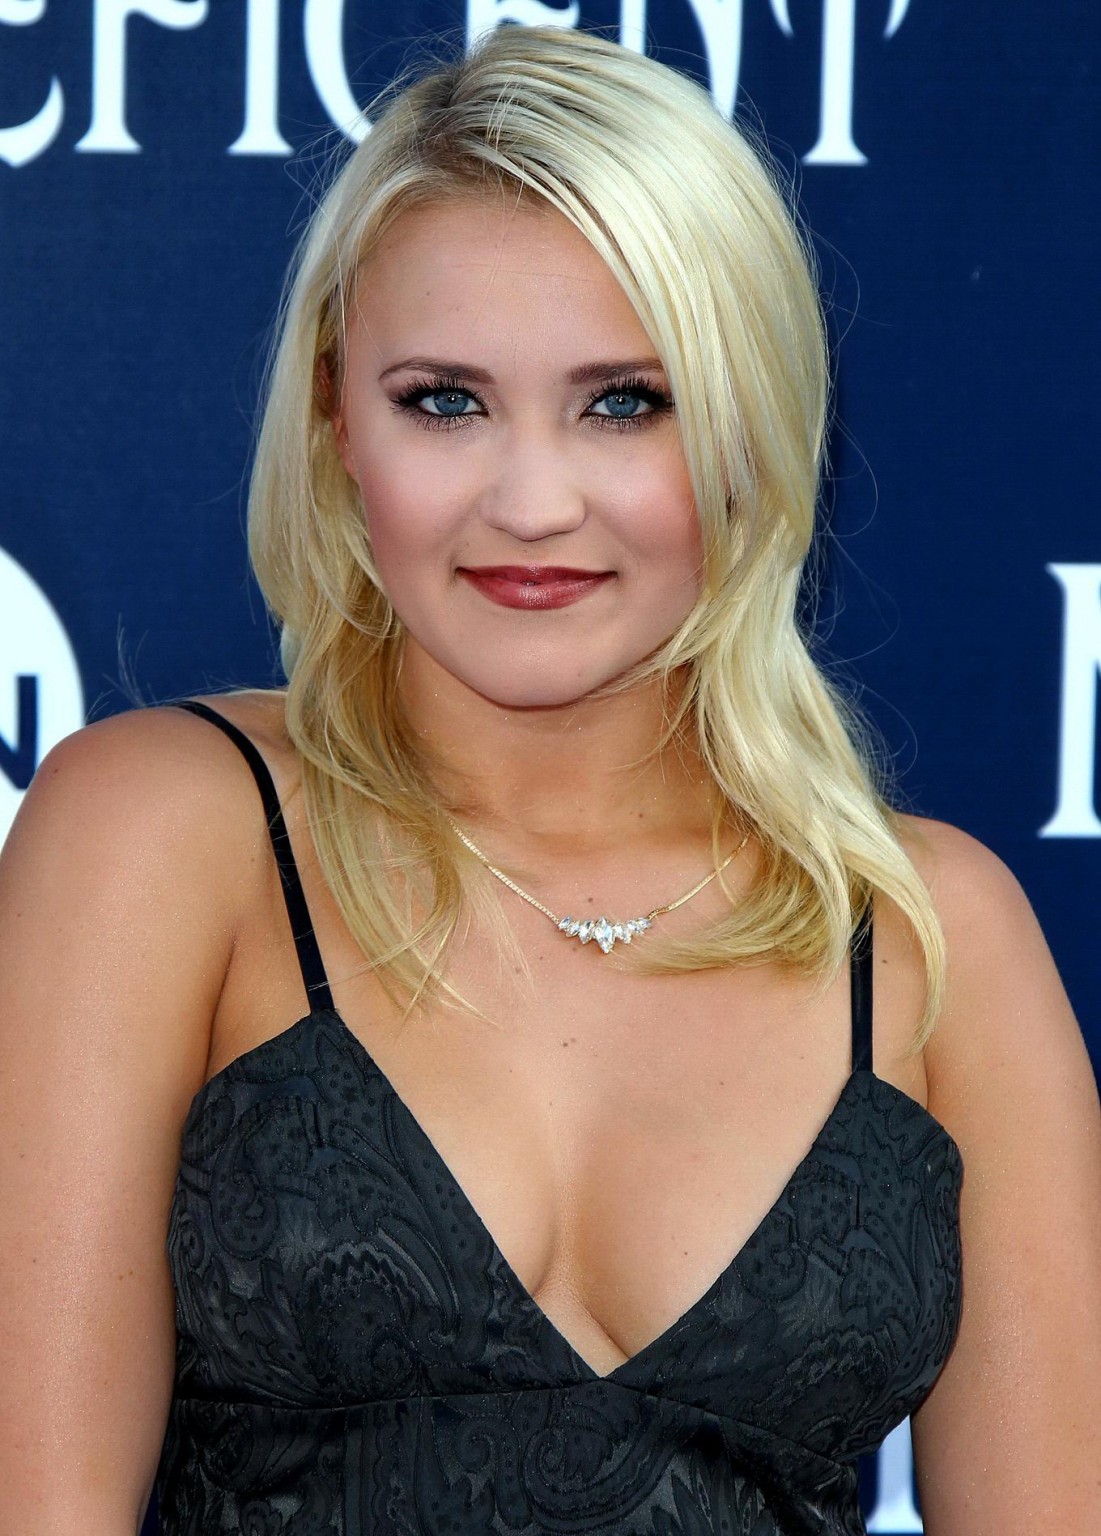 Busty Emily Osment wearing a low cut black dress at the Maleficent premiere in H #75195307